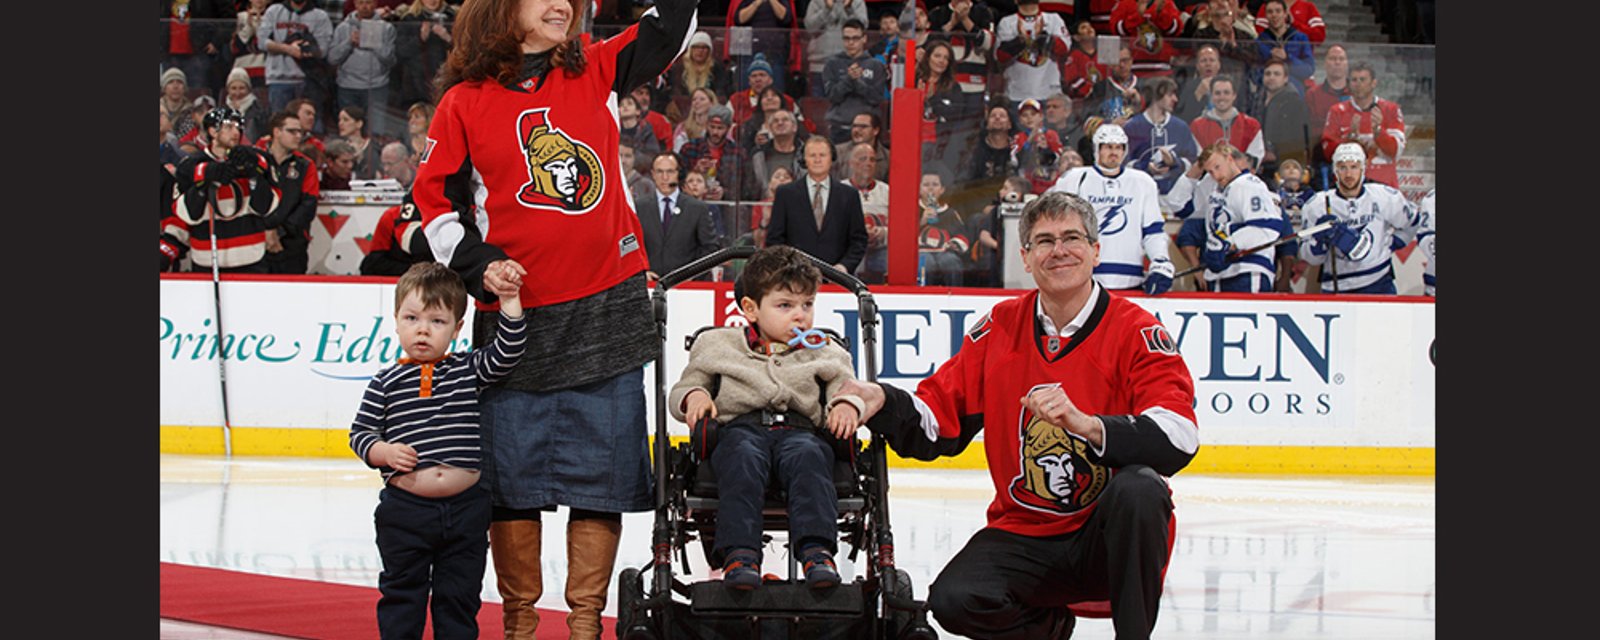 Report: Sens part ways with charity after conflicting views on social and political protests